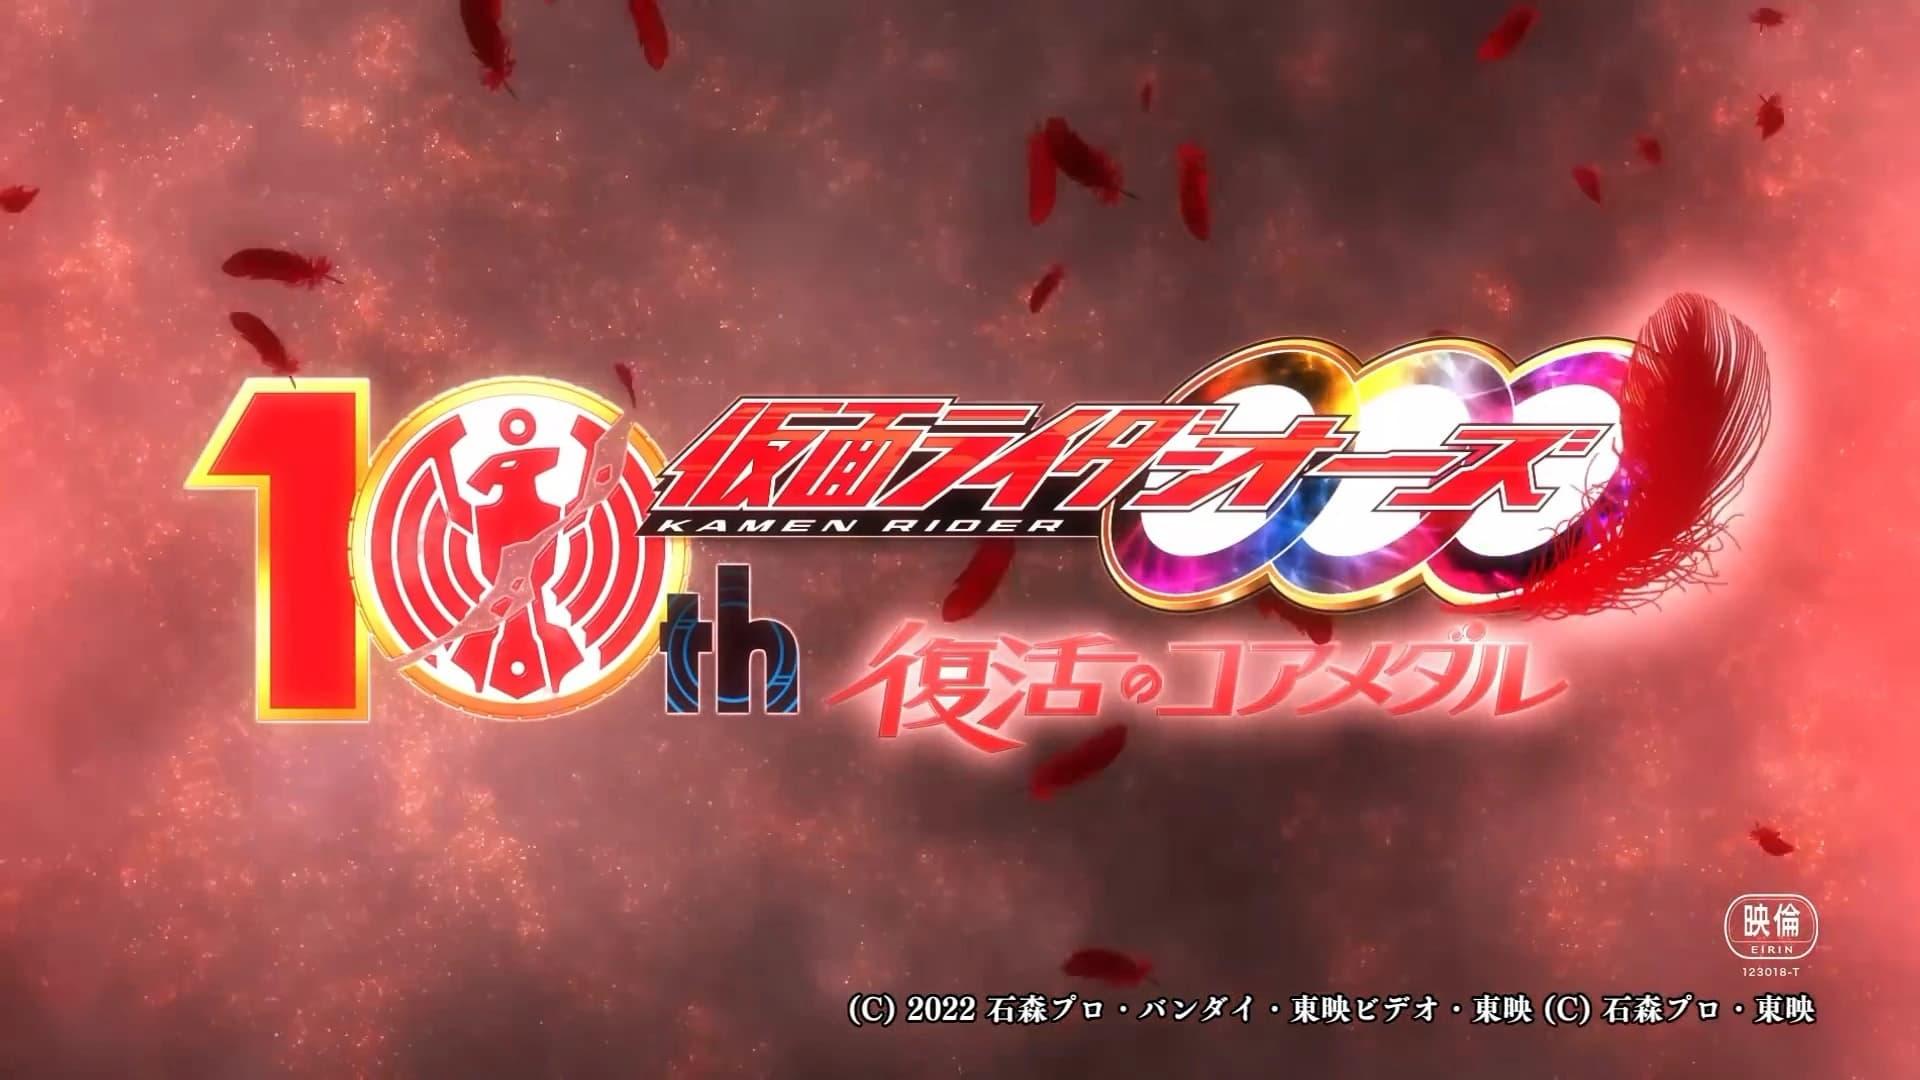 Kamen Rider OOO 10th: The Core Medals of Resurrection backdrop